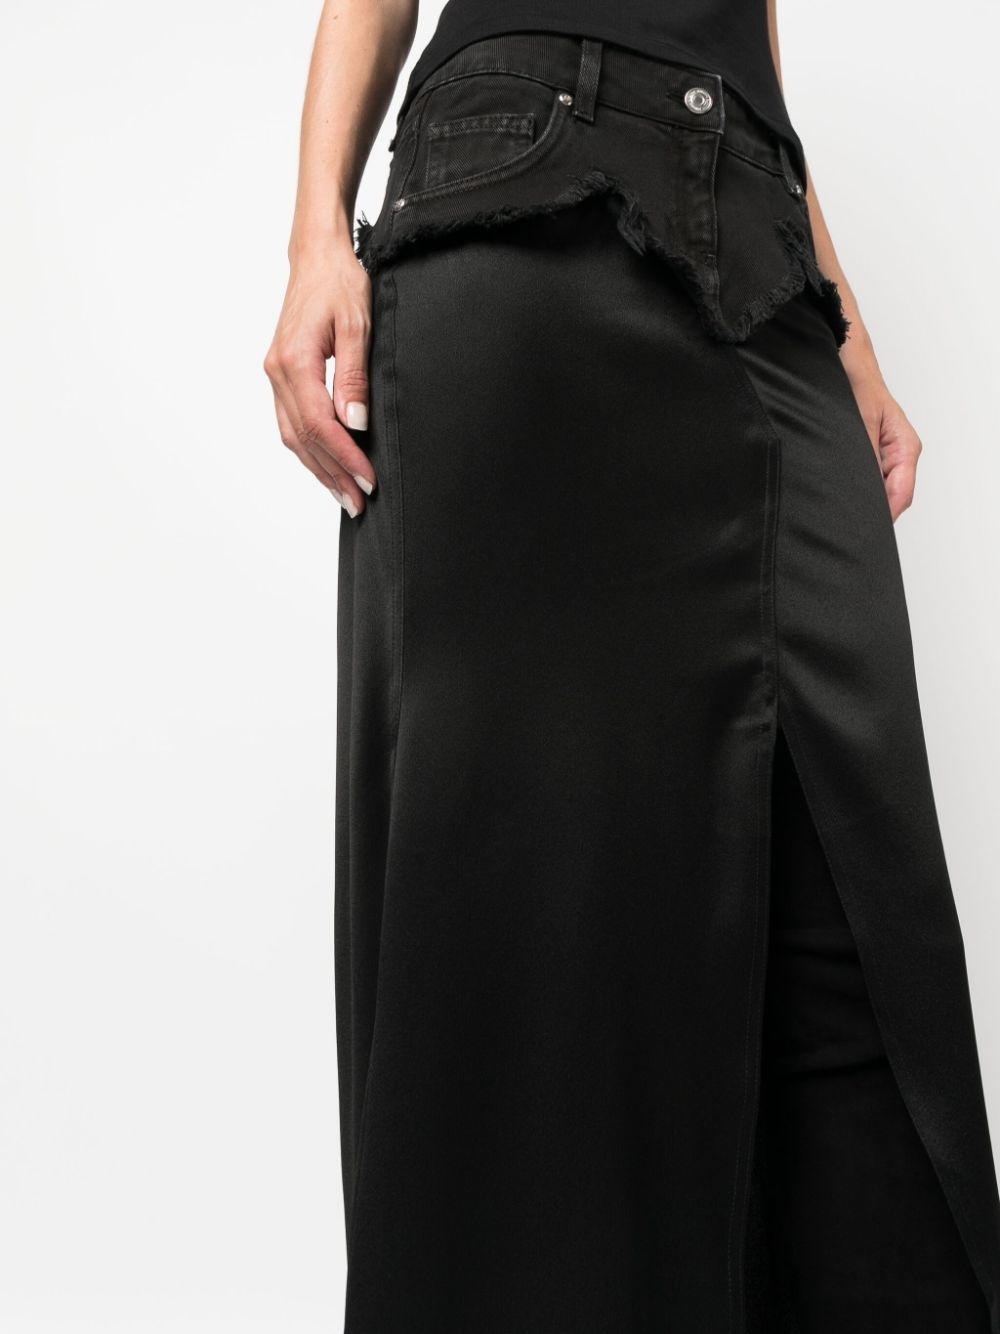 layered detail ankle-length skirt - 5